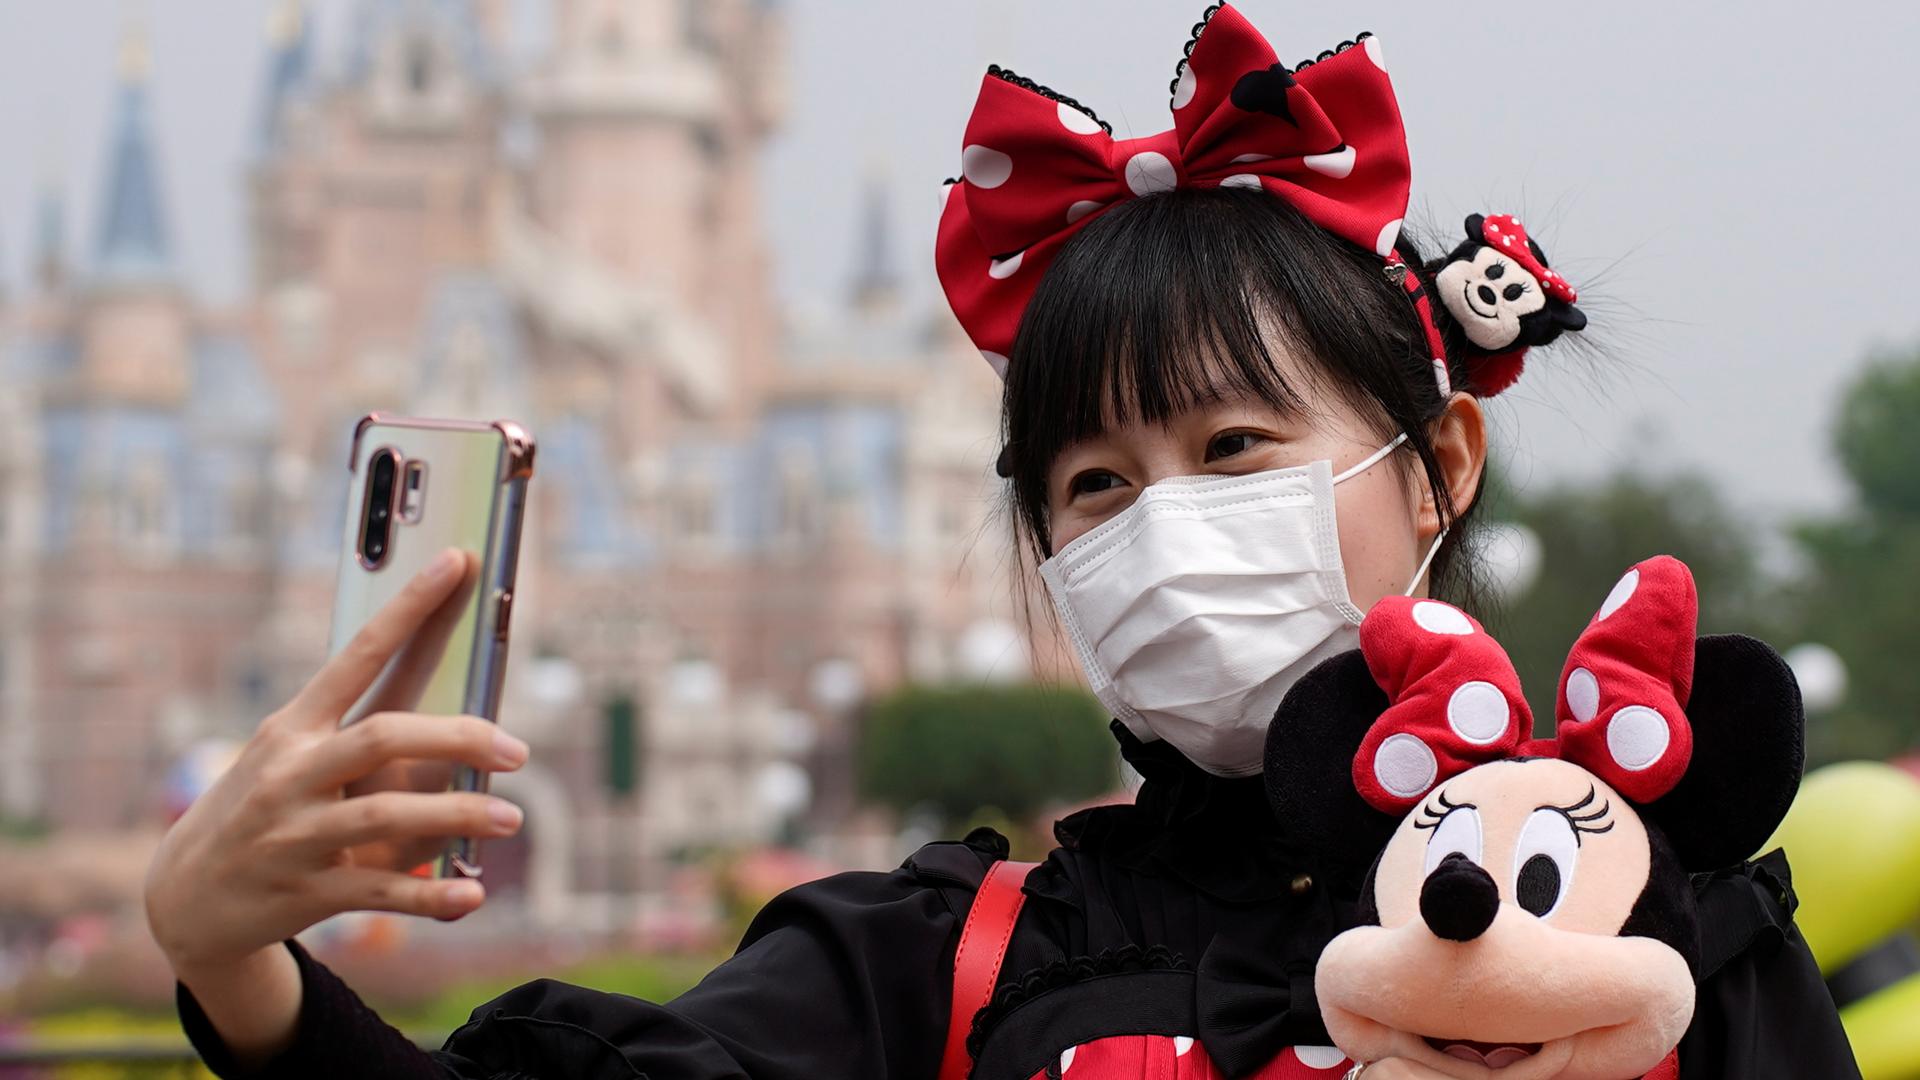 A young woman wears a red bow and holds a doll as she takes a selfie at Disneyland in Shanghai